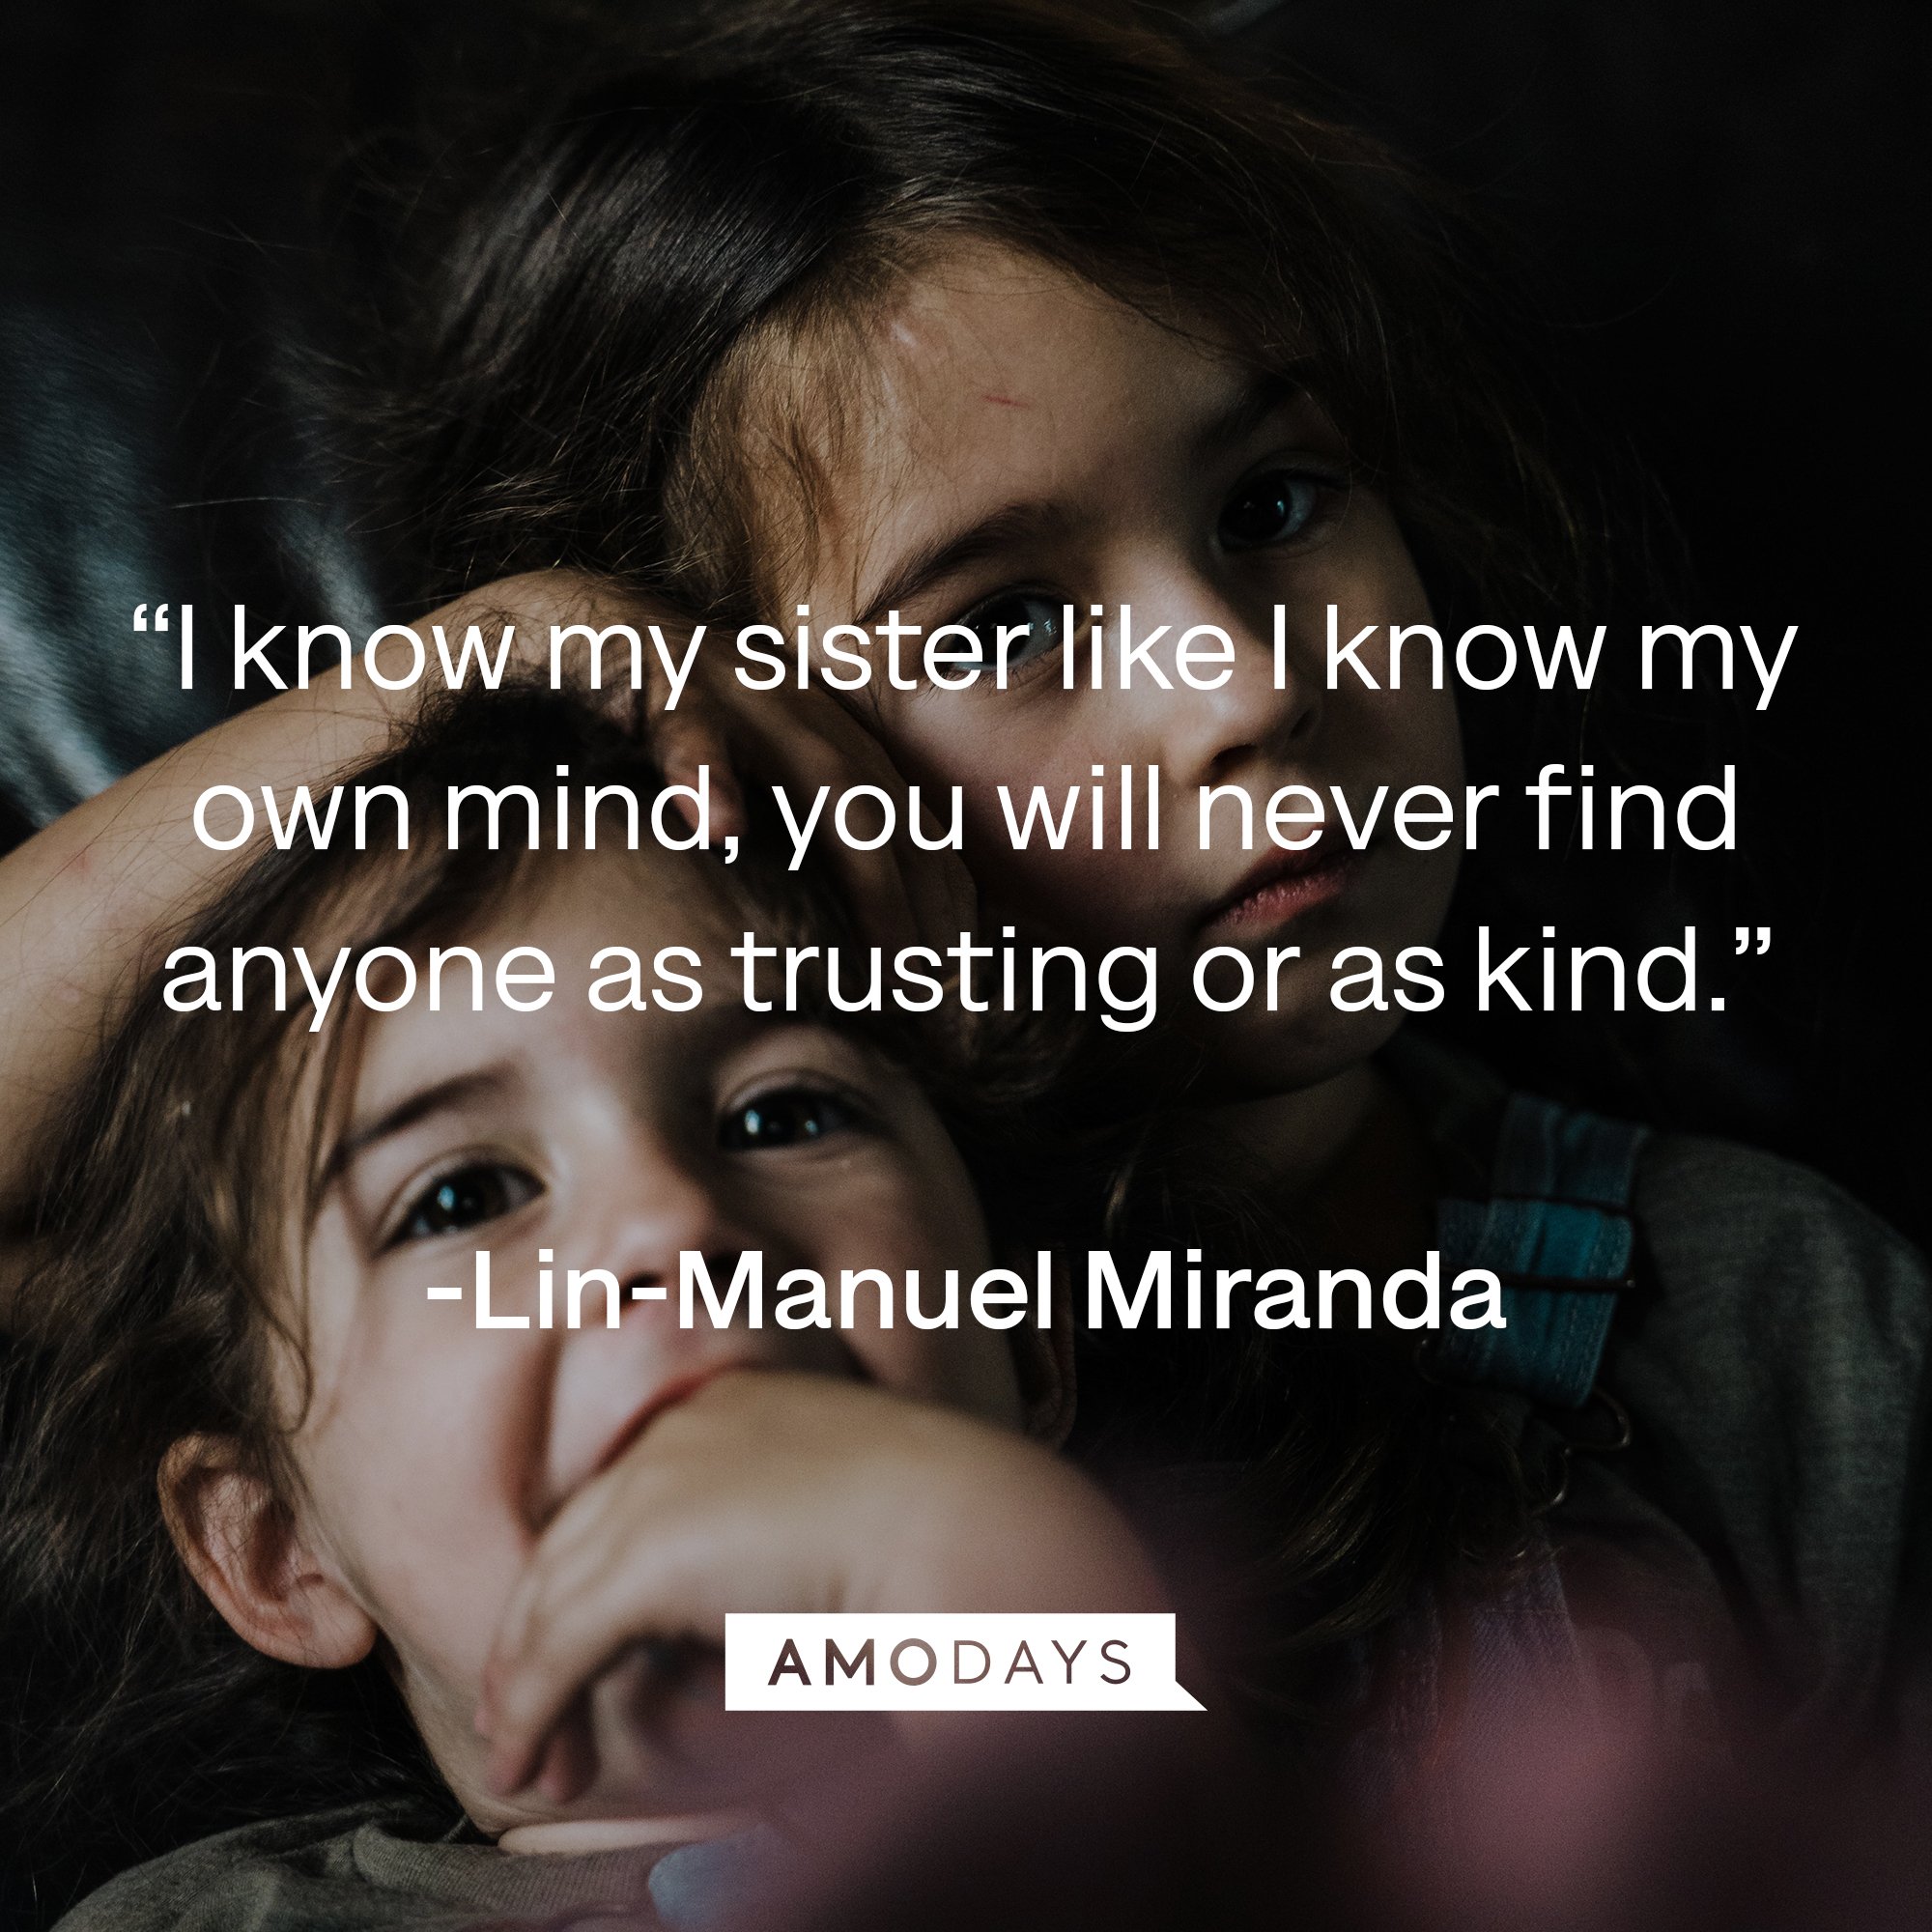 Lin-Manuel Miranda's quote: “I know my sister like I know my own mind, you will never find anyone as trusting or as kind.” | Image: AmoDays